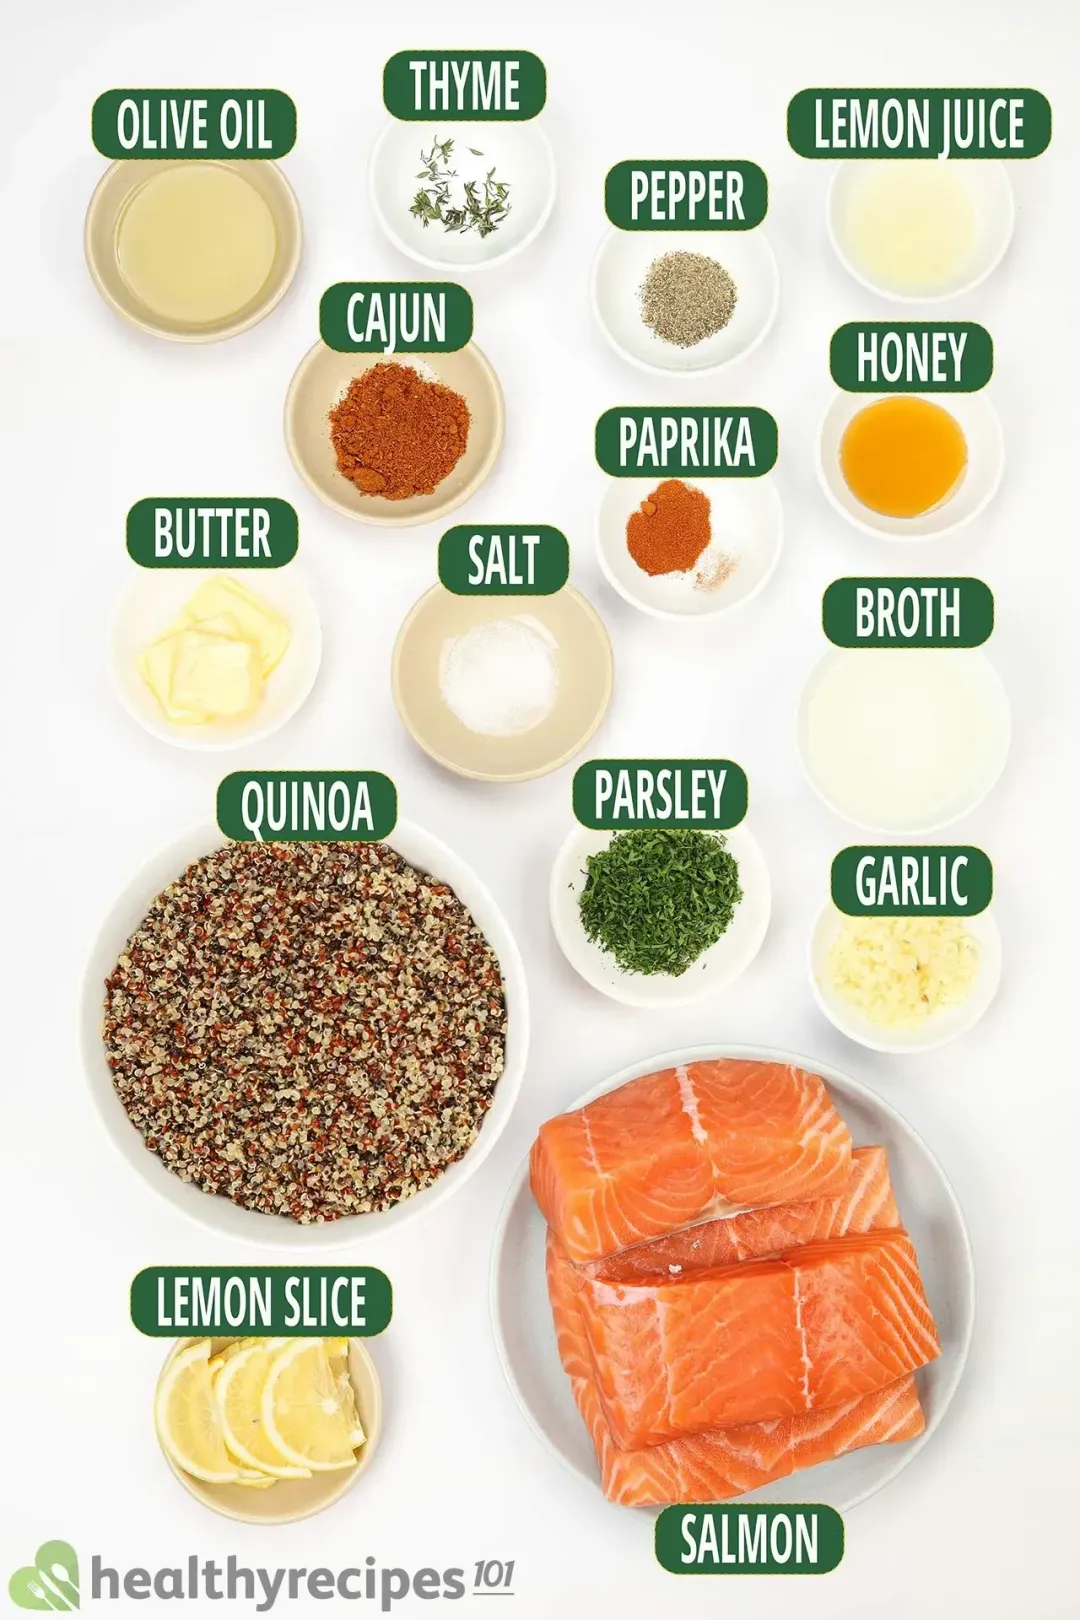 The ingredients include salmon fillets, lemon slices, mixed quinoa, olive oil, lemon juice, honey, butter, broth, and some herbs and spices.